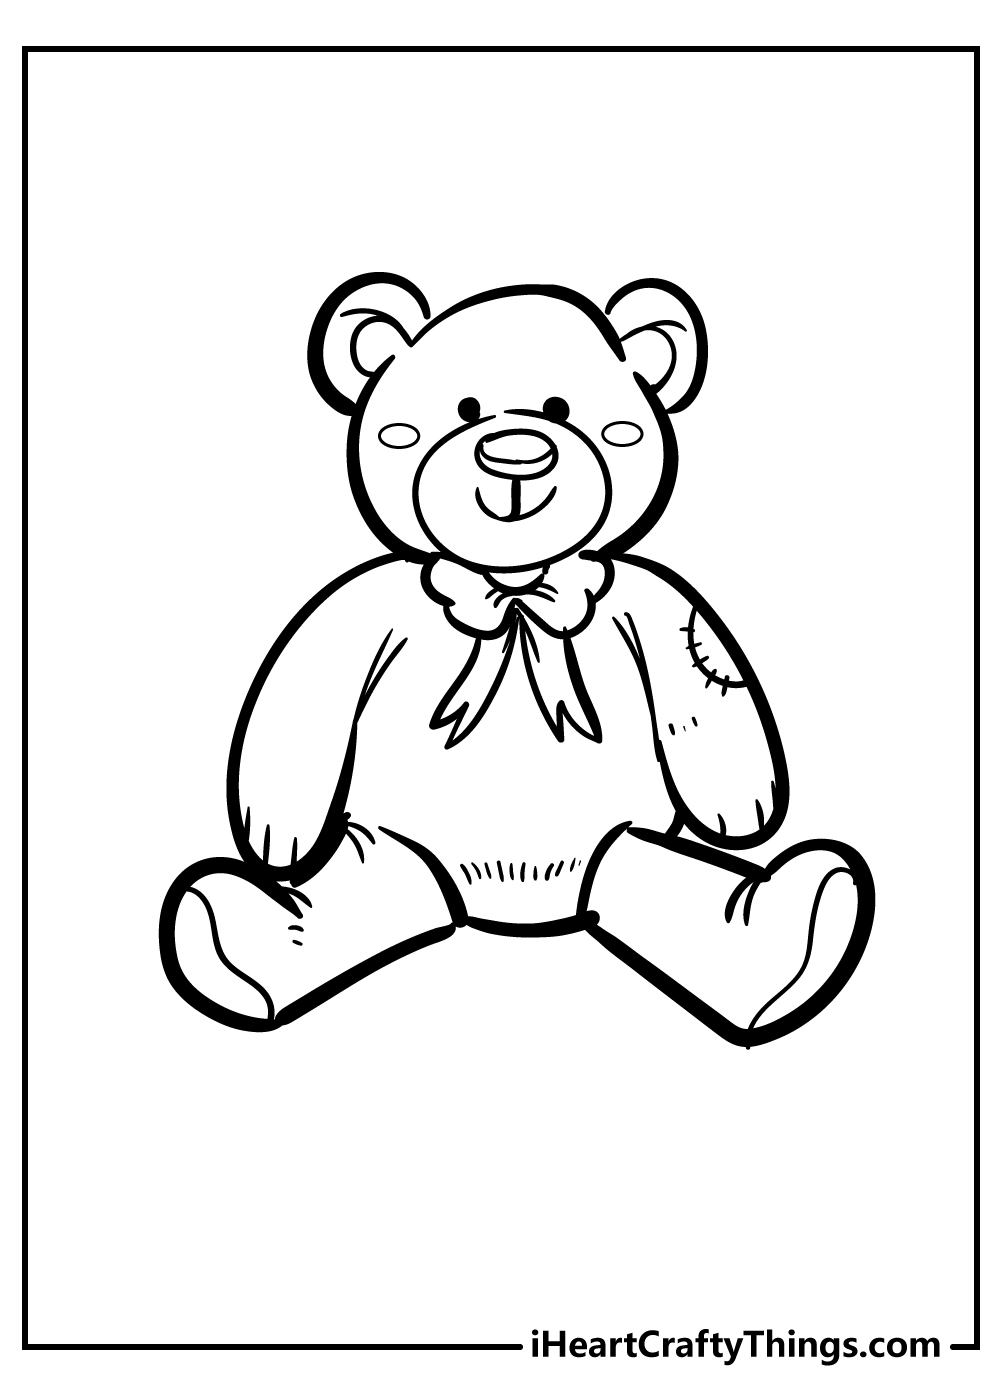 Teddy Bear Coloring Book for adults free download